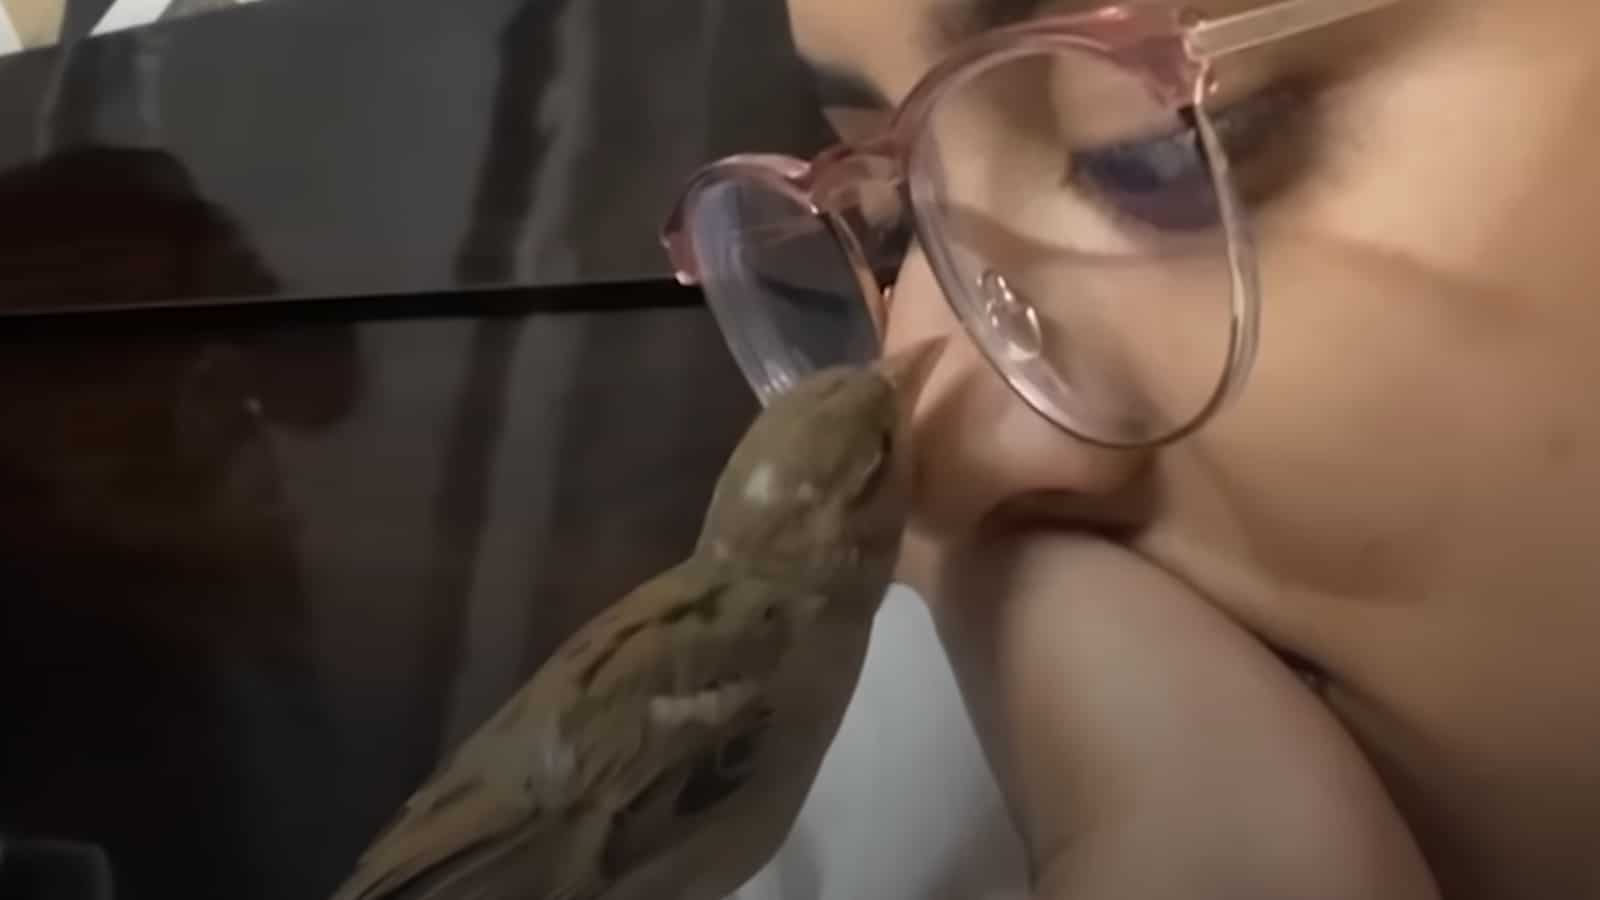 tiny bird near the face of a woman wearing glasses